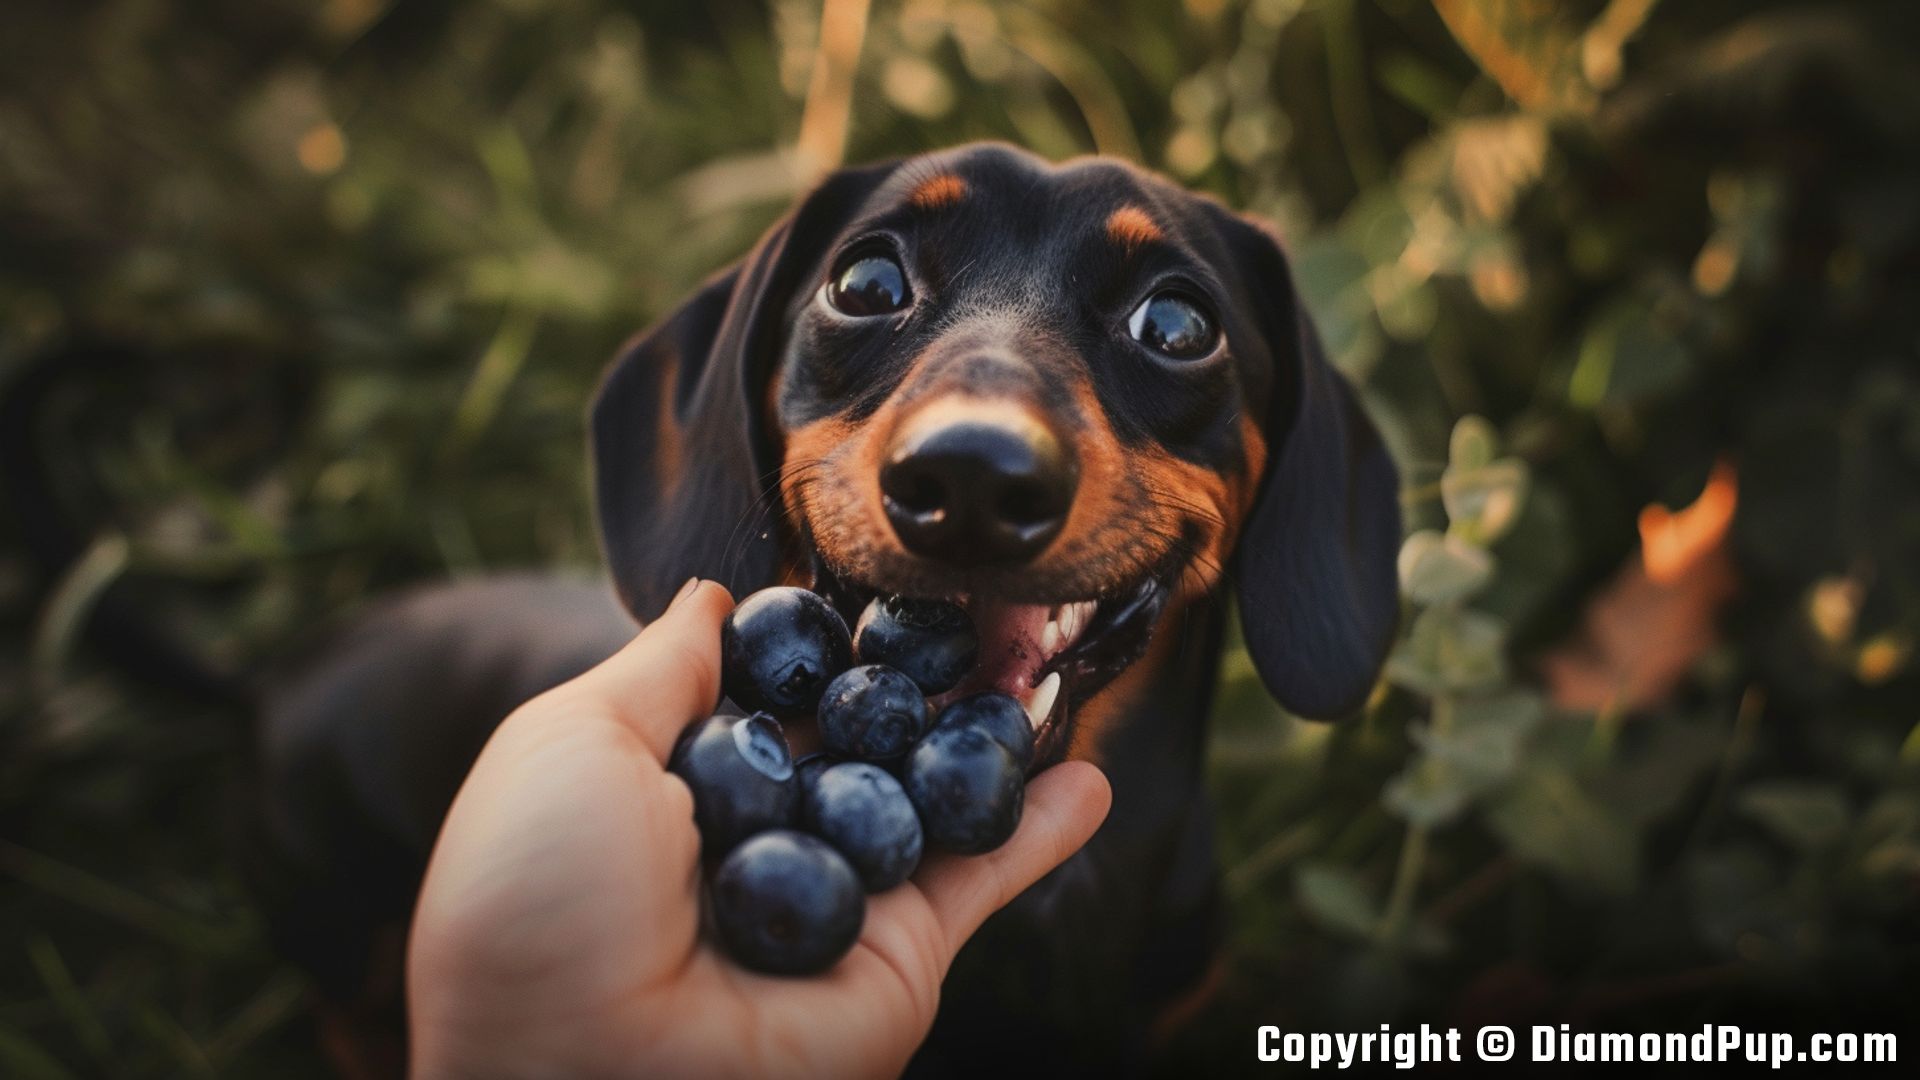 Photograph of a Happy Dachshund Snacking on Blueberries